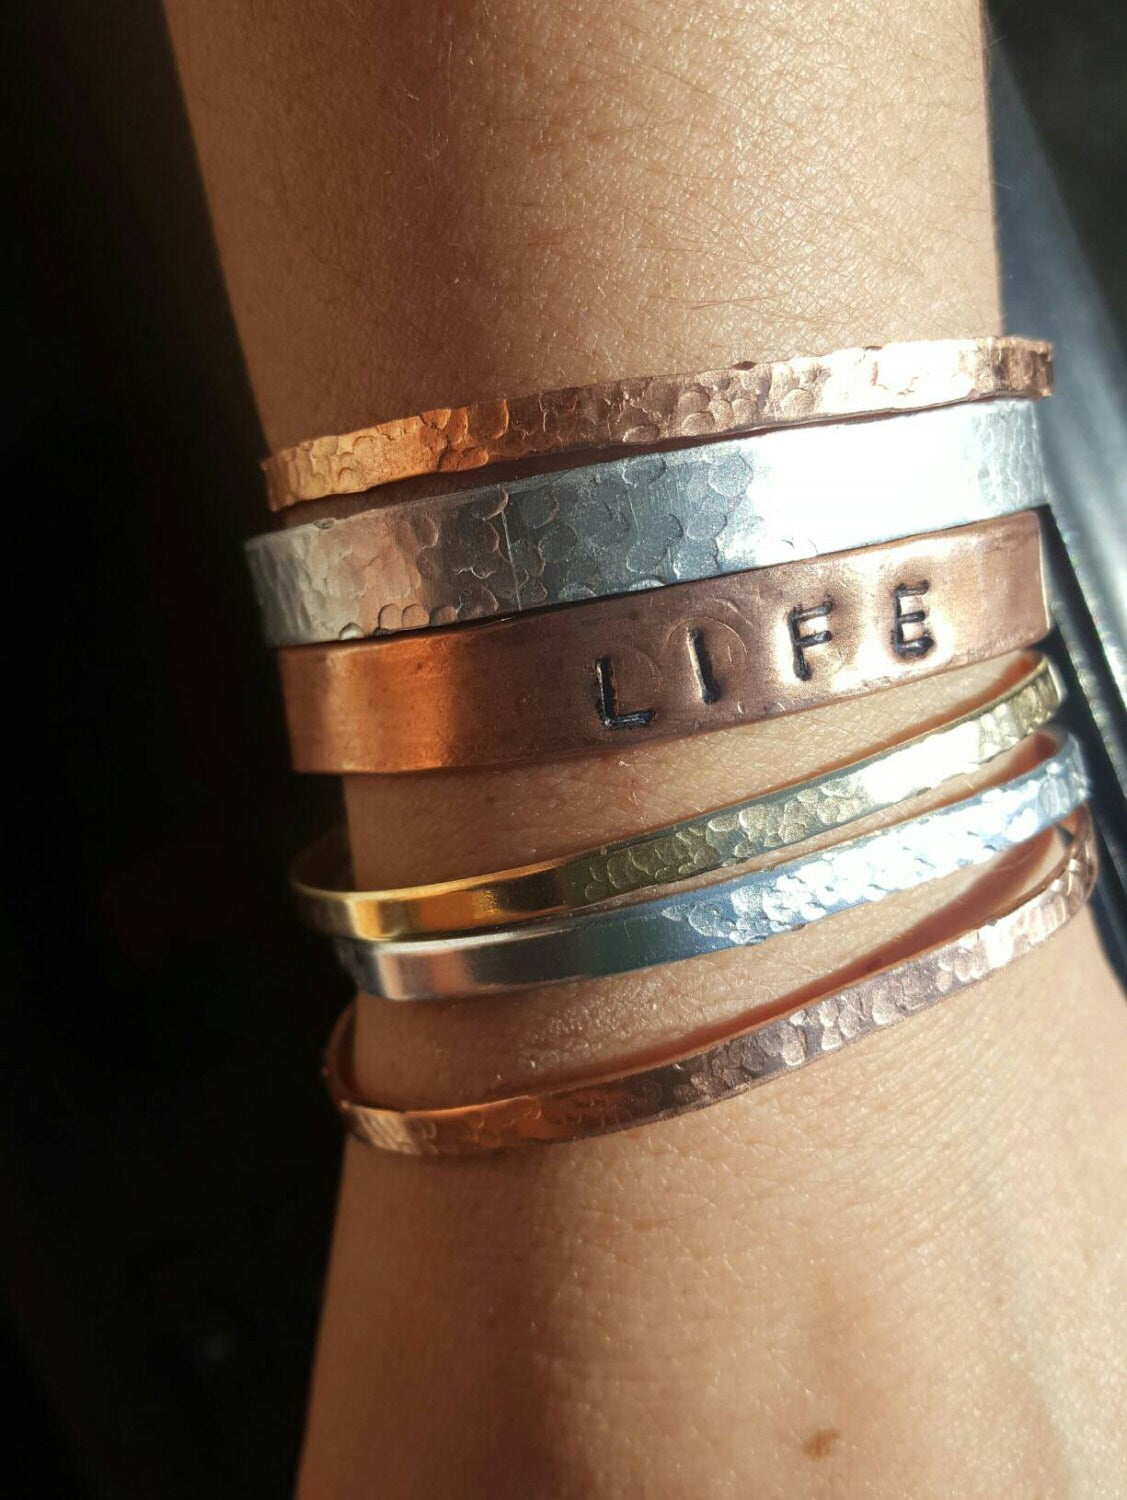 FREE SHIPPING 5 Hammered Bracelets, Stacked Bracelet Set, Personalized Bracelets, Hand Stamped Cuffs, Hammered Jewelry